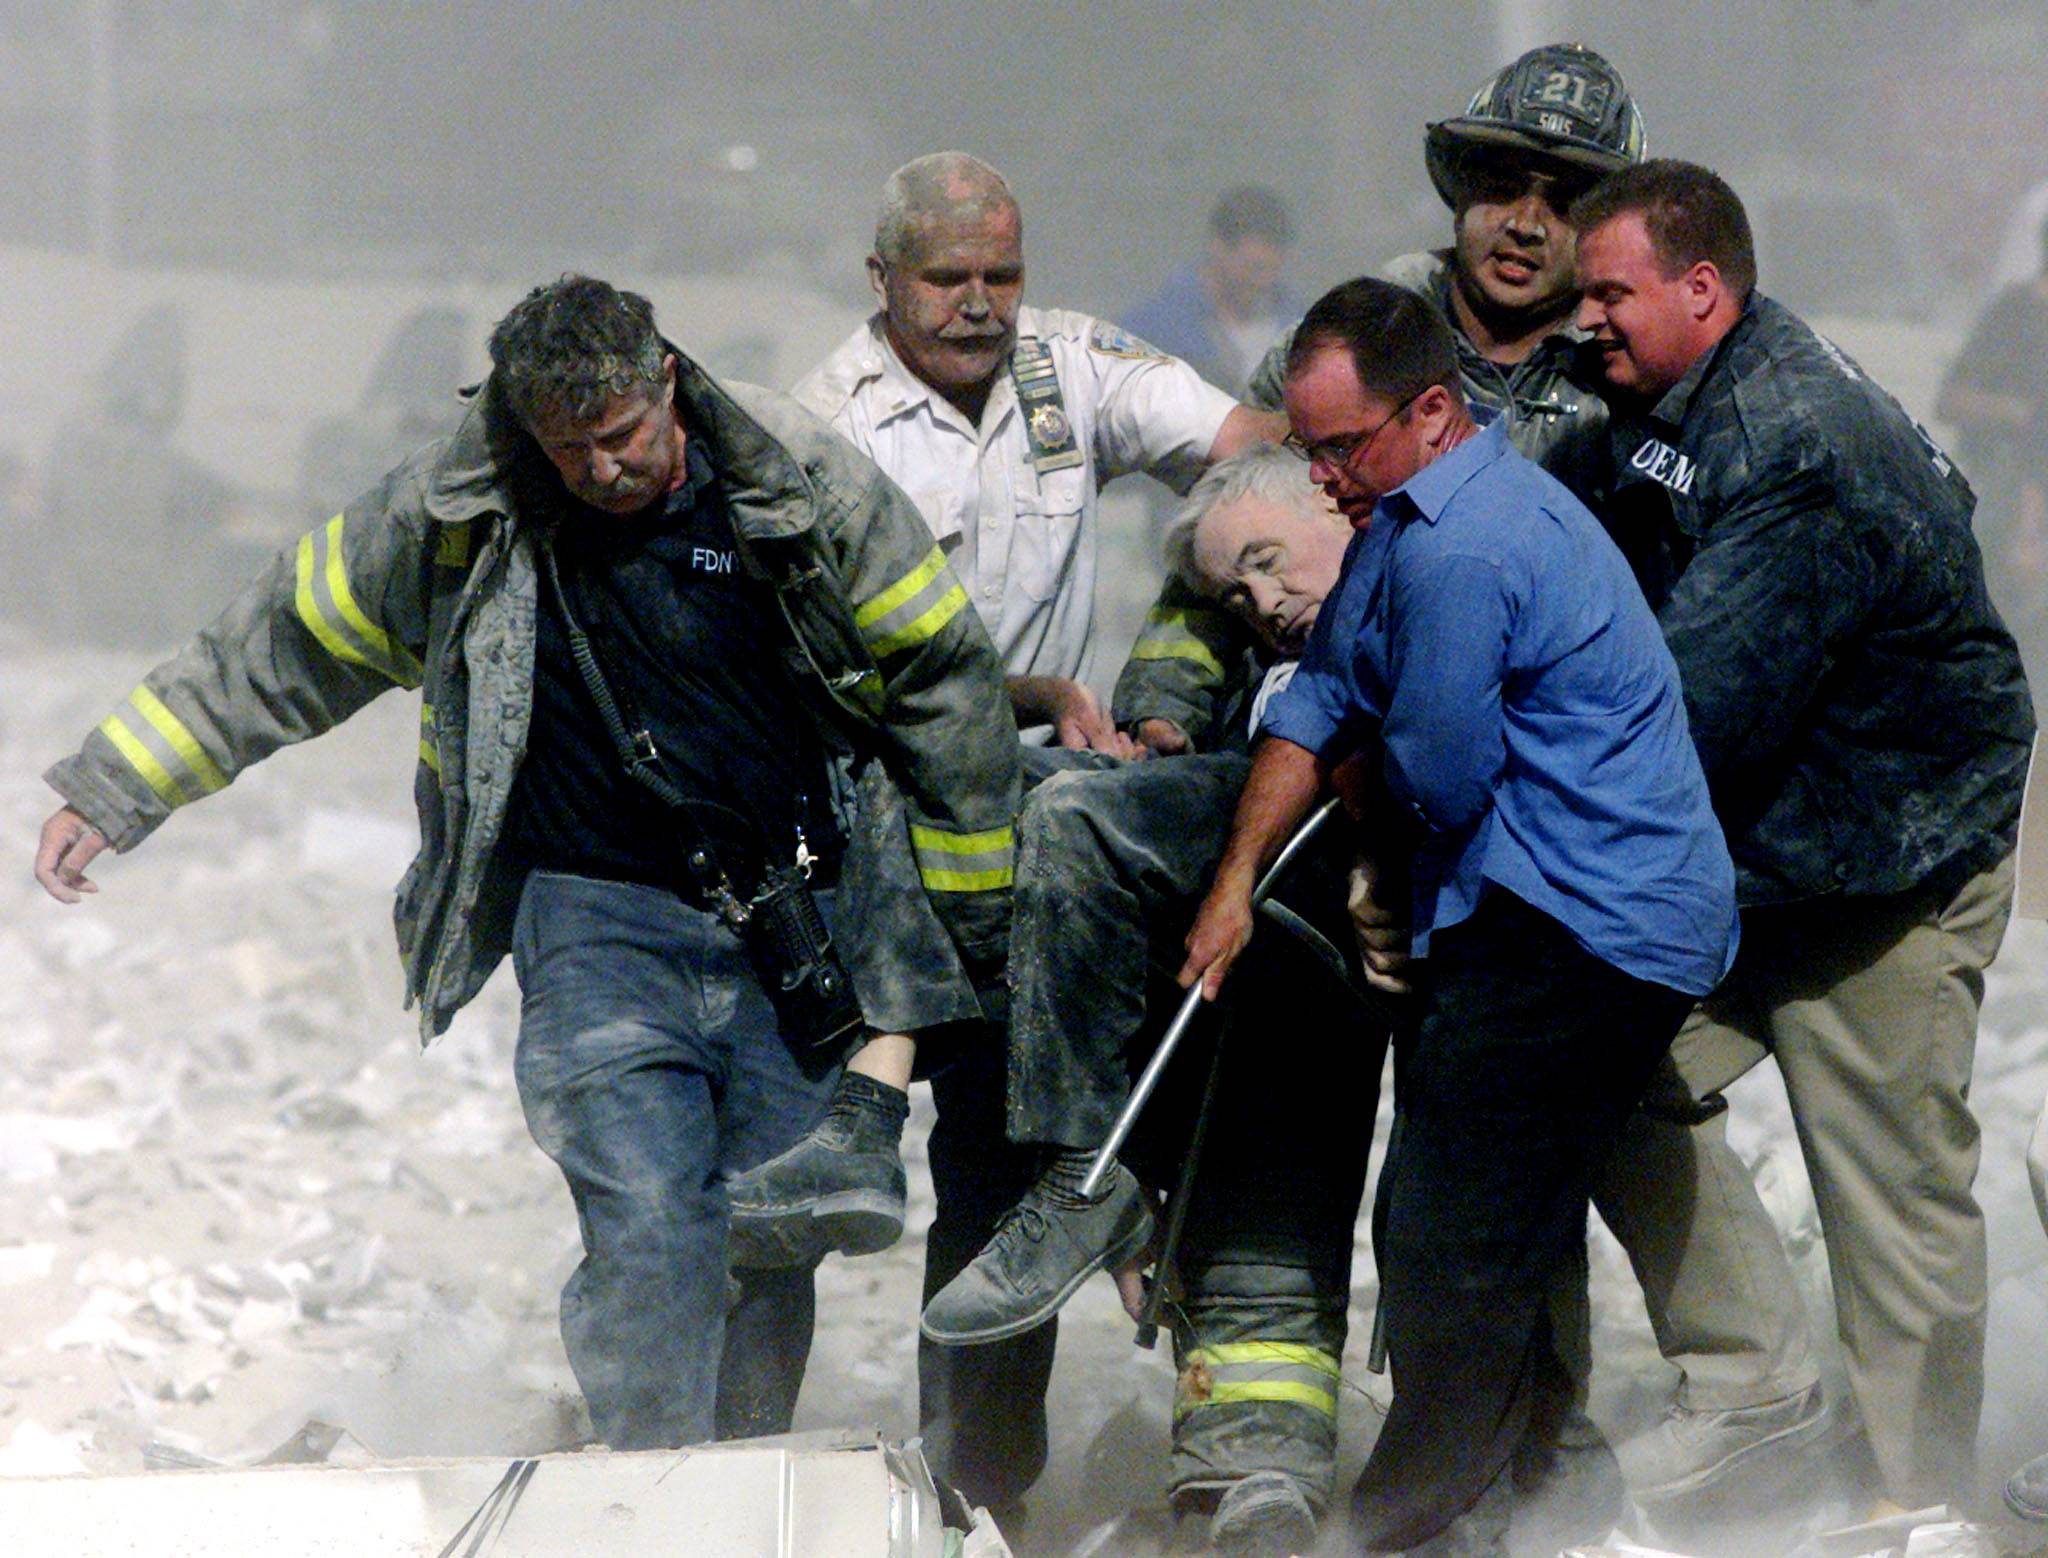 The Rescue - Shortly after the attacks, survivors leave the World Trade Center, but for those who don’t have the ability to &nbsp;leave quickly, firefighters begin their arduous search through the rubble. (Photo: Shannon Stapleton / Reuters)